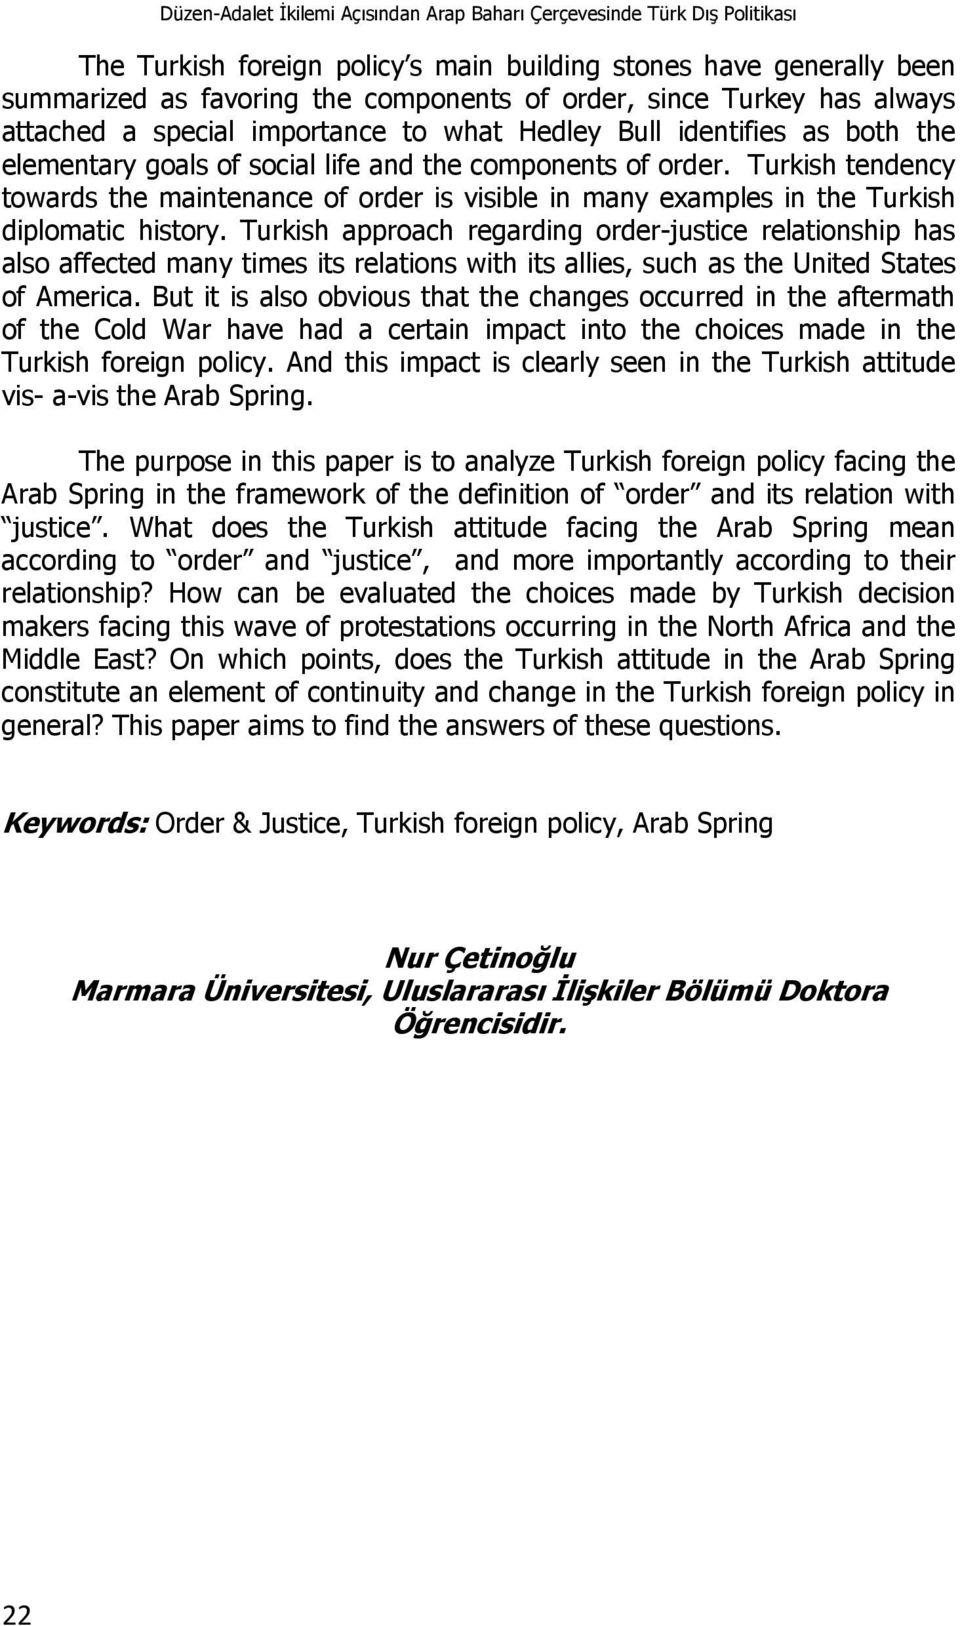 Turkish tendency towards the maintenance of order is visible in many examples in the Turkish diplomatic history.